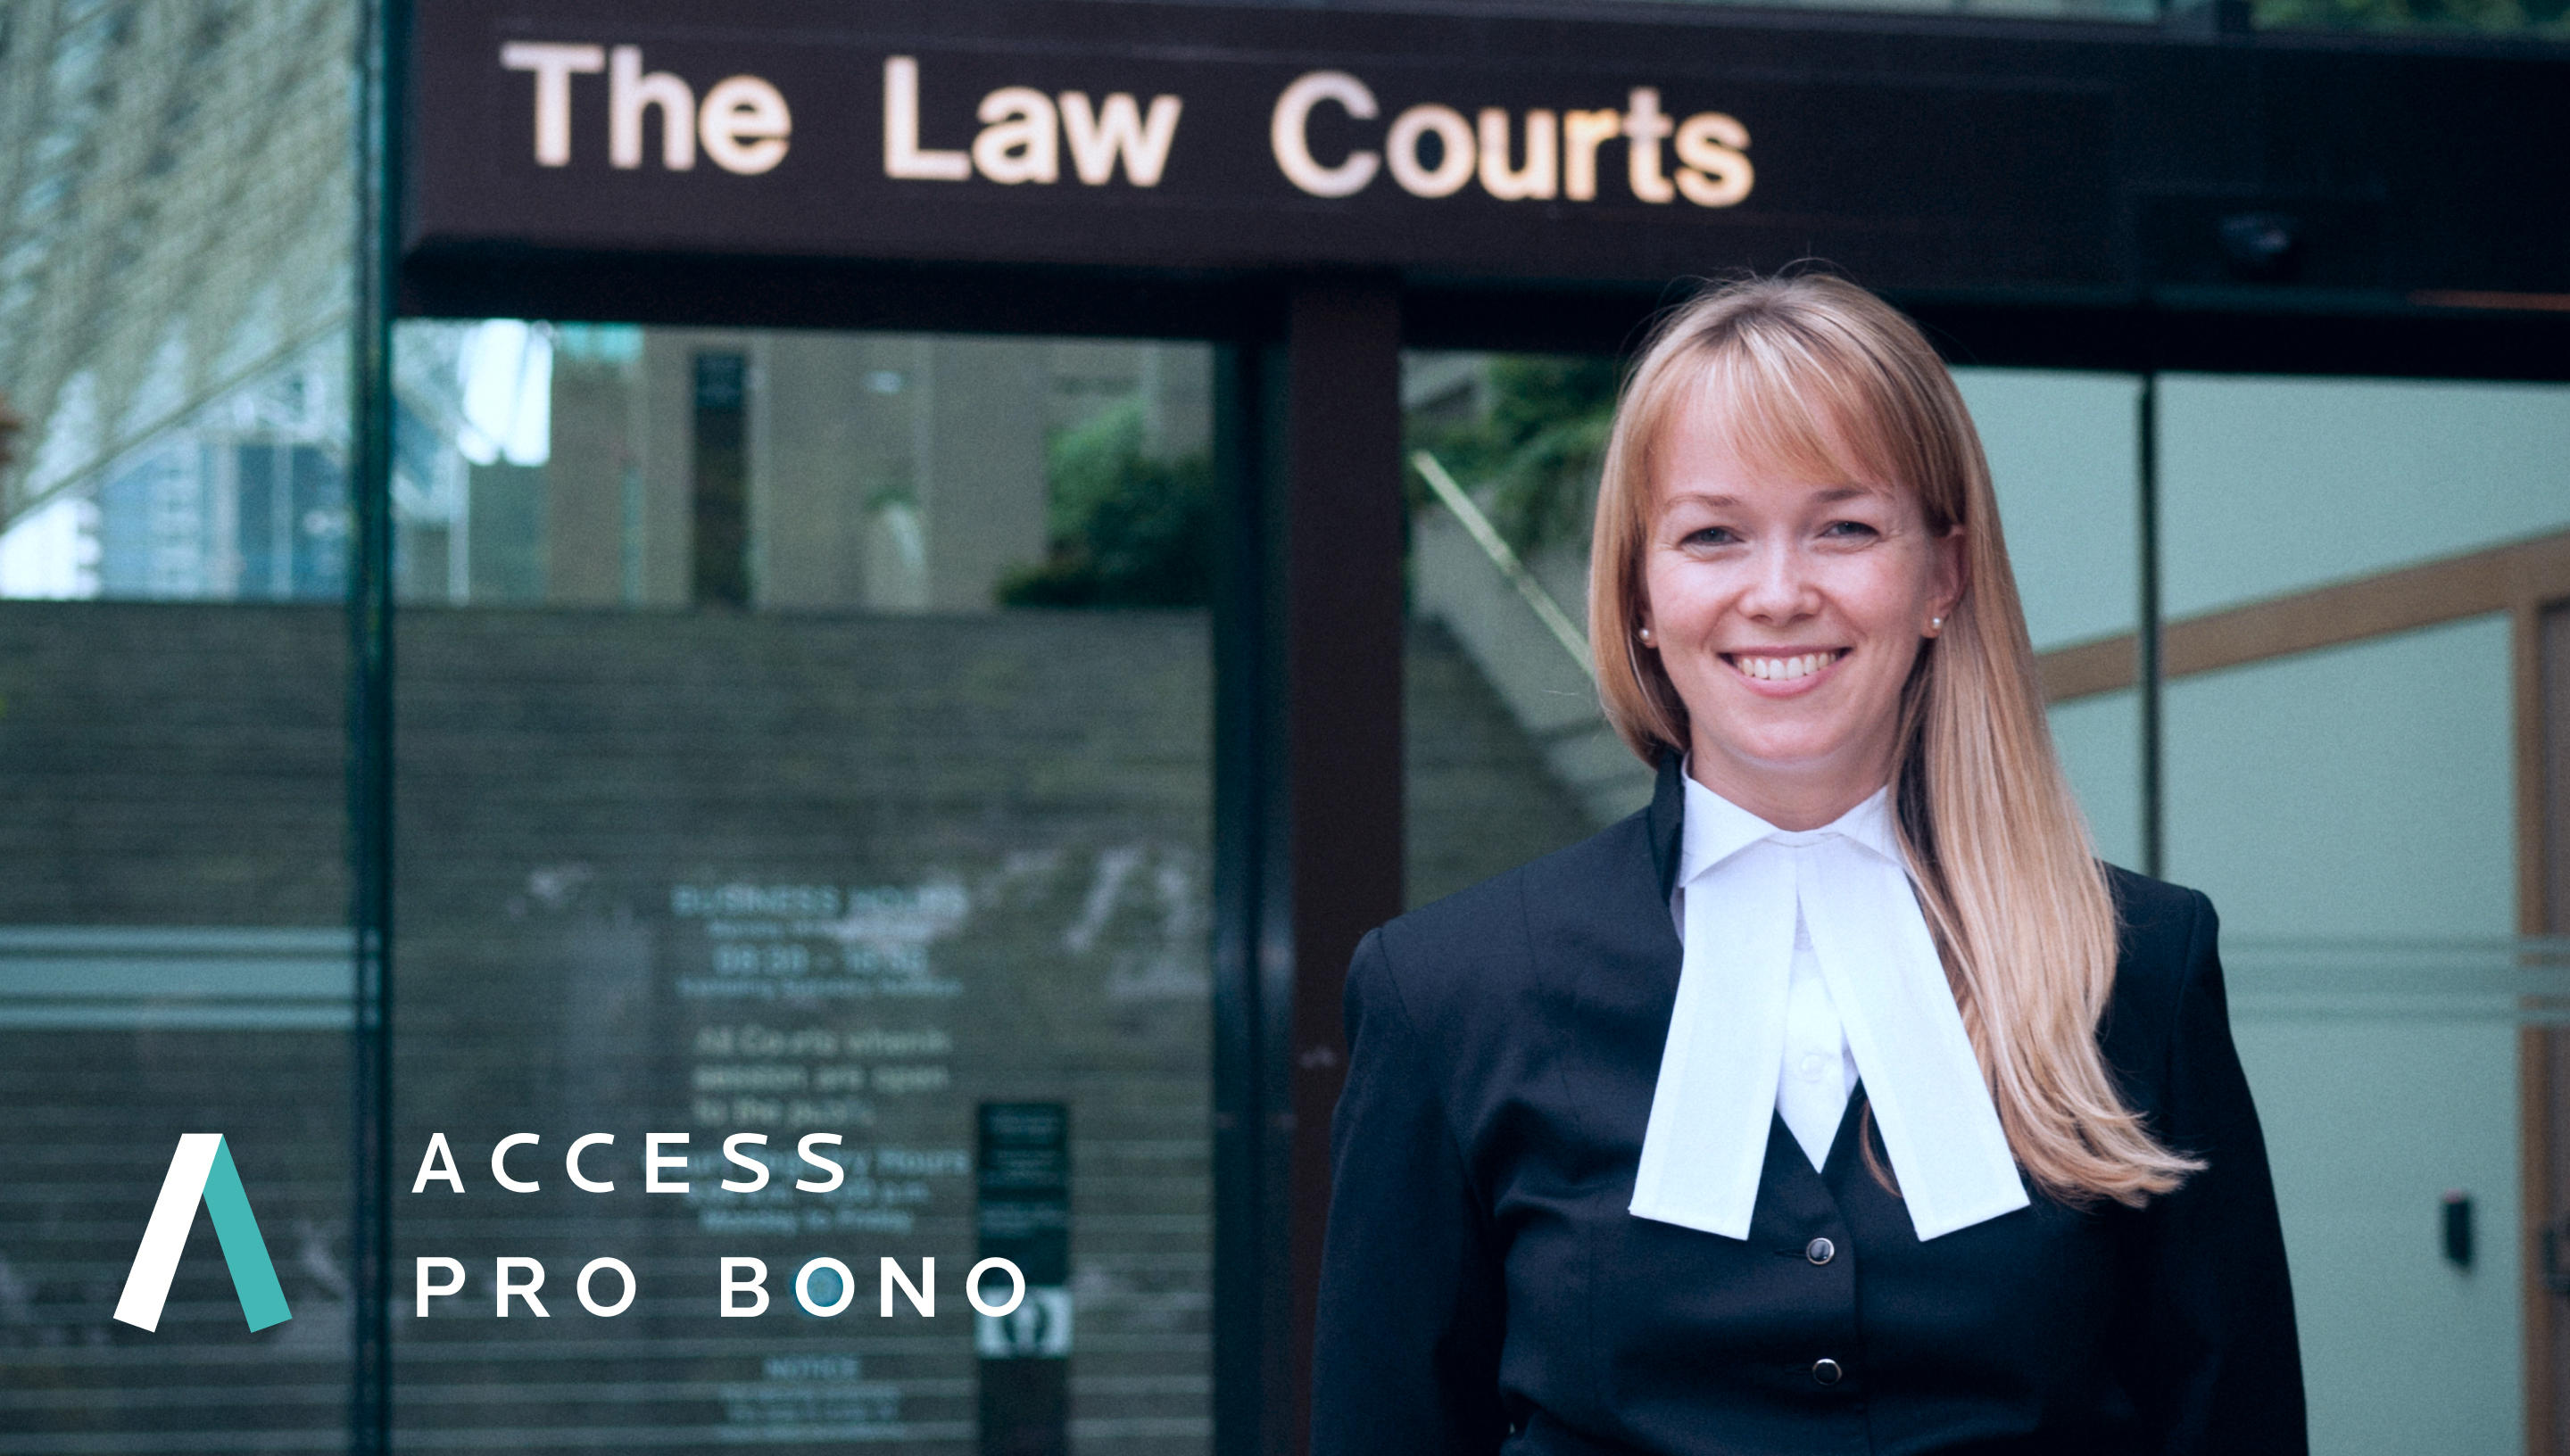 Woman standing in the front of The Law Courts building with the Access Pro Bono logo